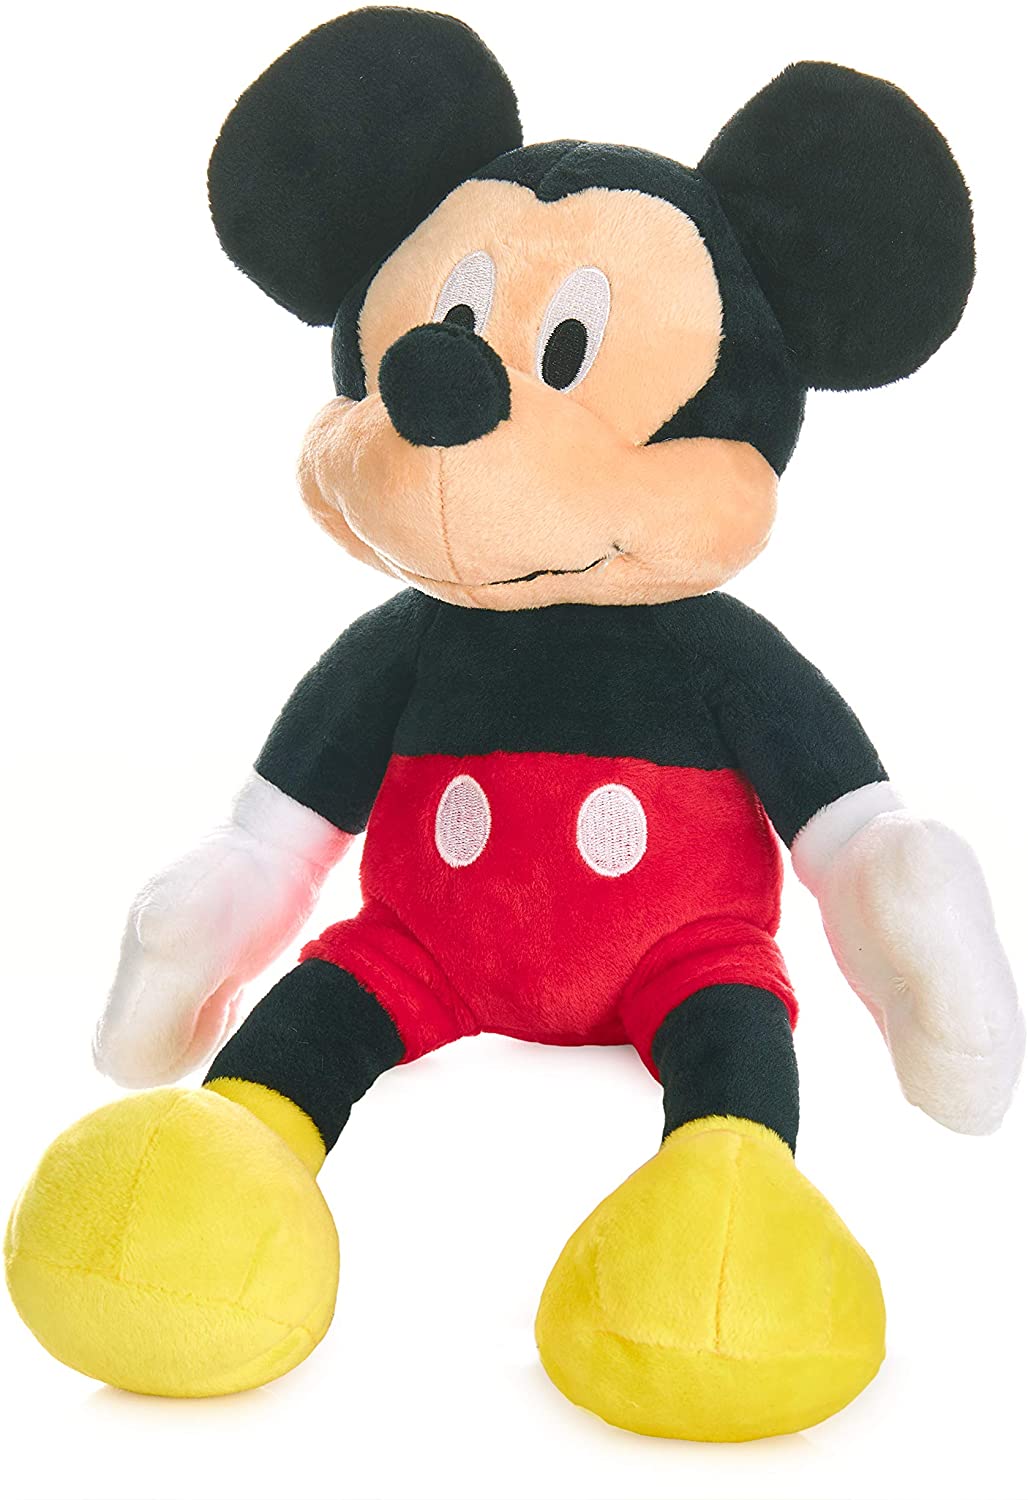 Disney Baby Mickey Mouse Stuffed Animal Plush Toy with Jingler and Crinkle, 14 Inches